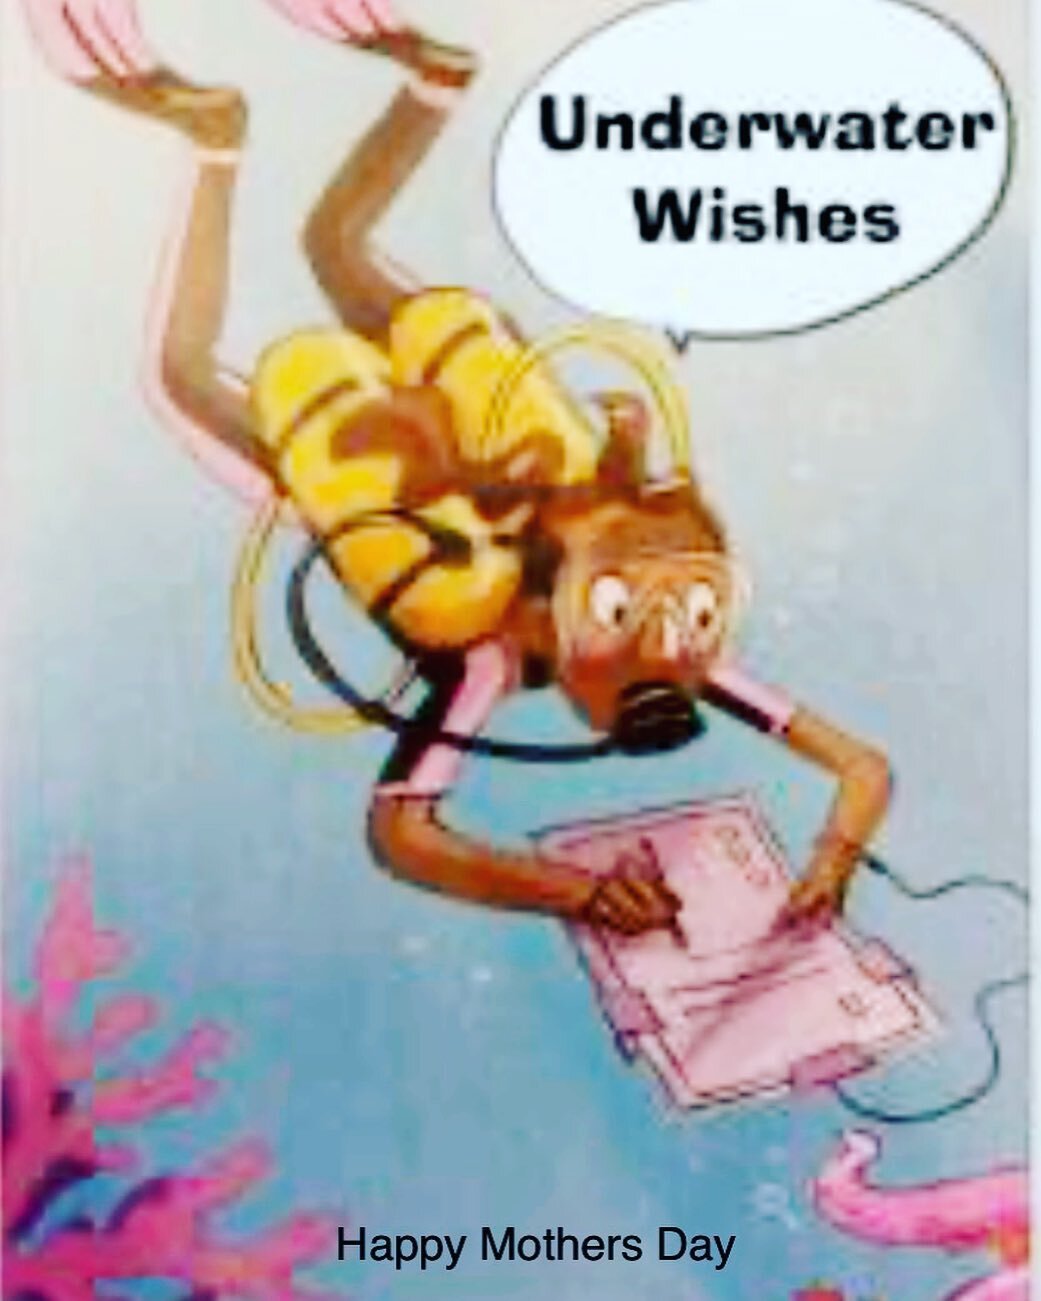 Wishing all Mums a Happy Mothers Day @onelovescuba